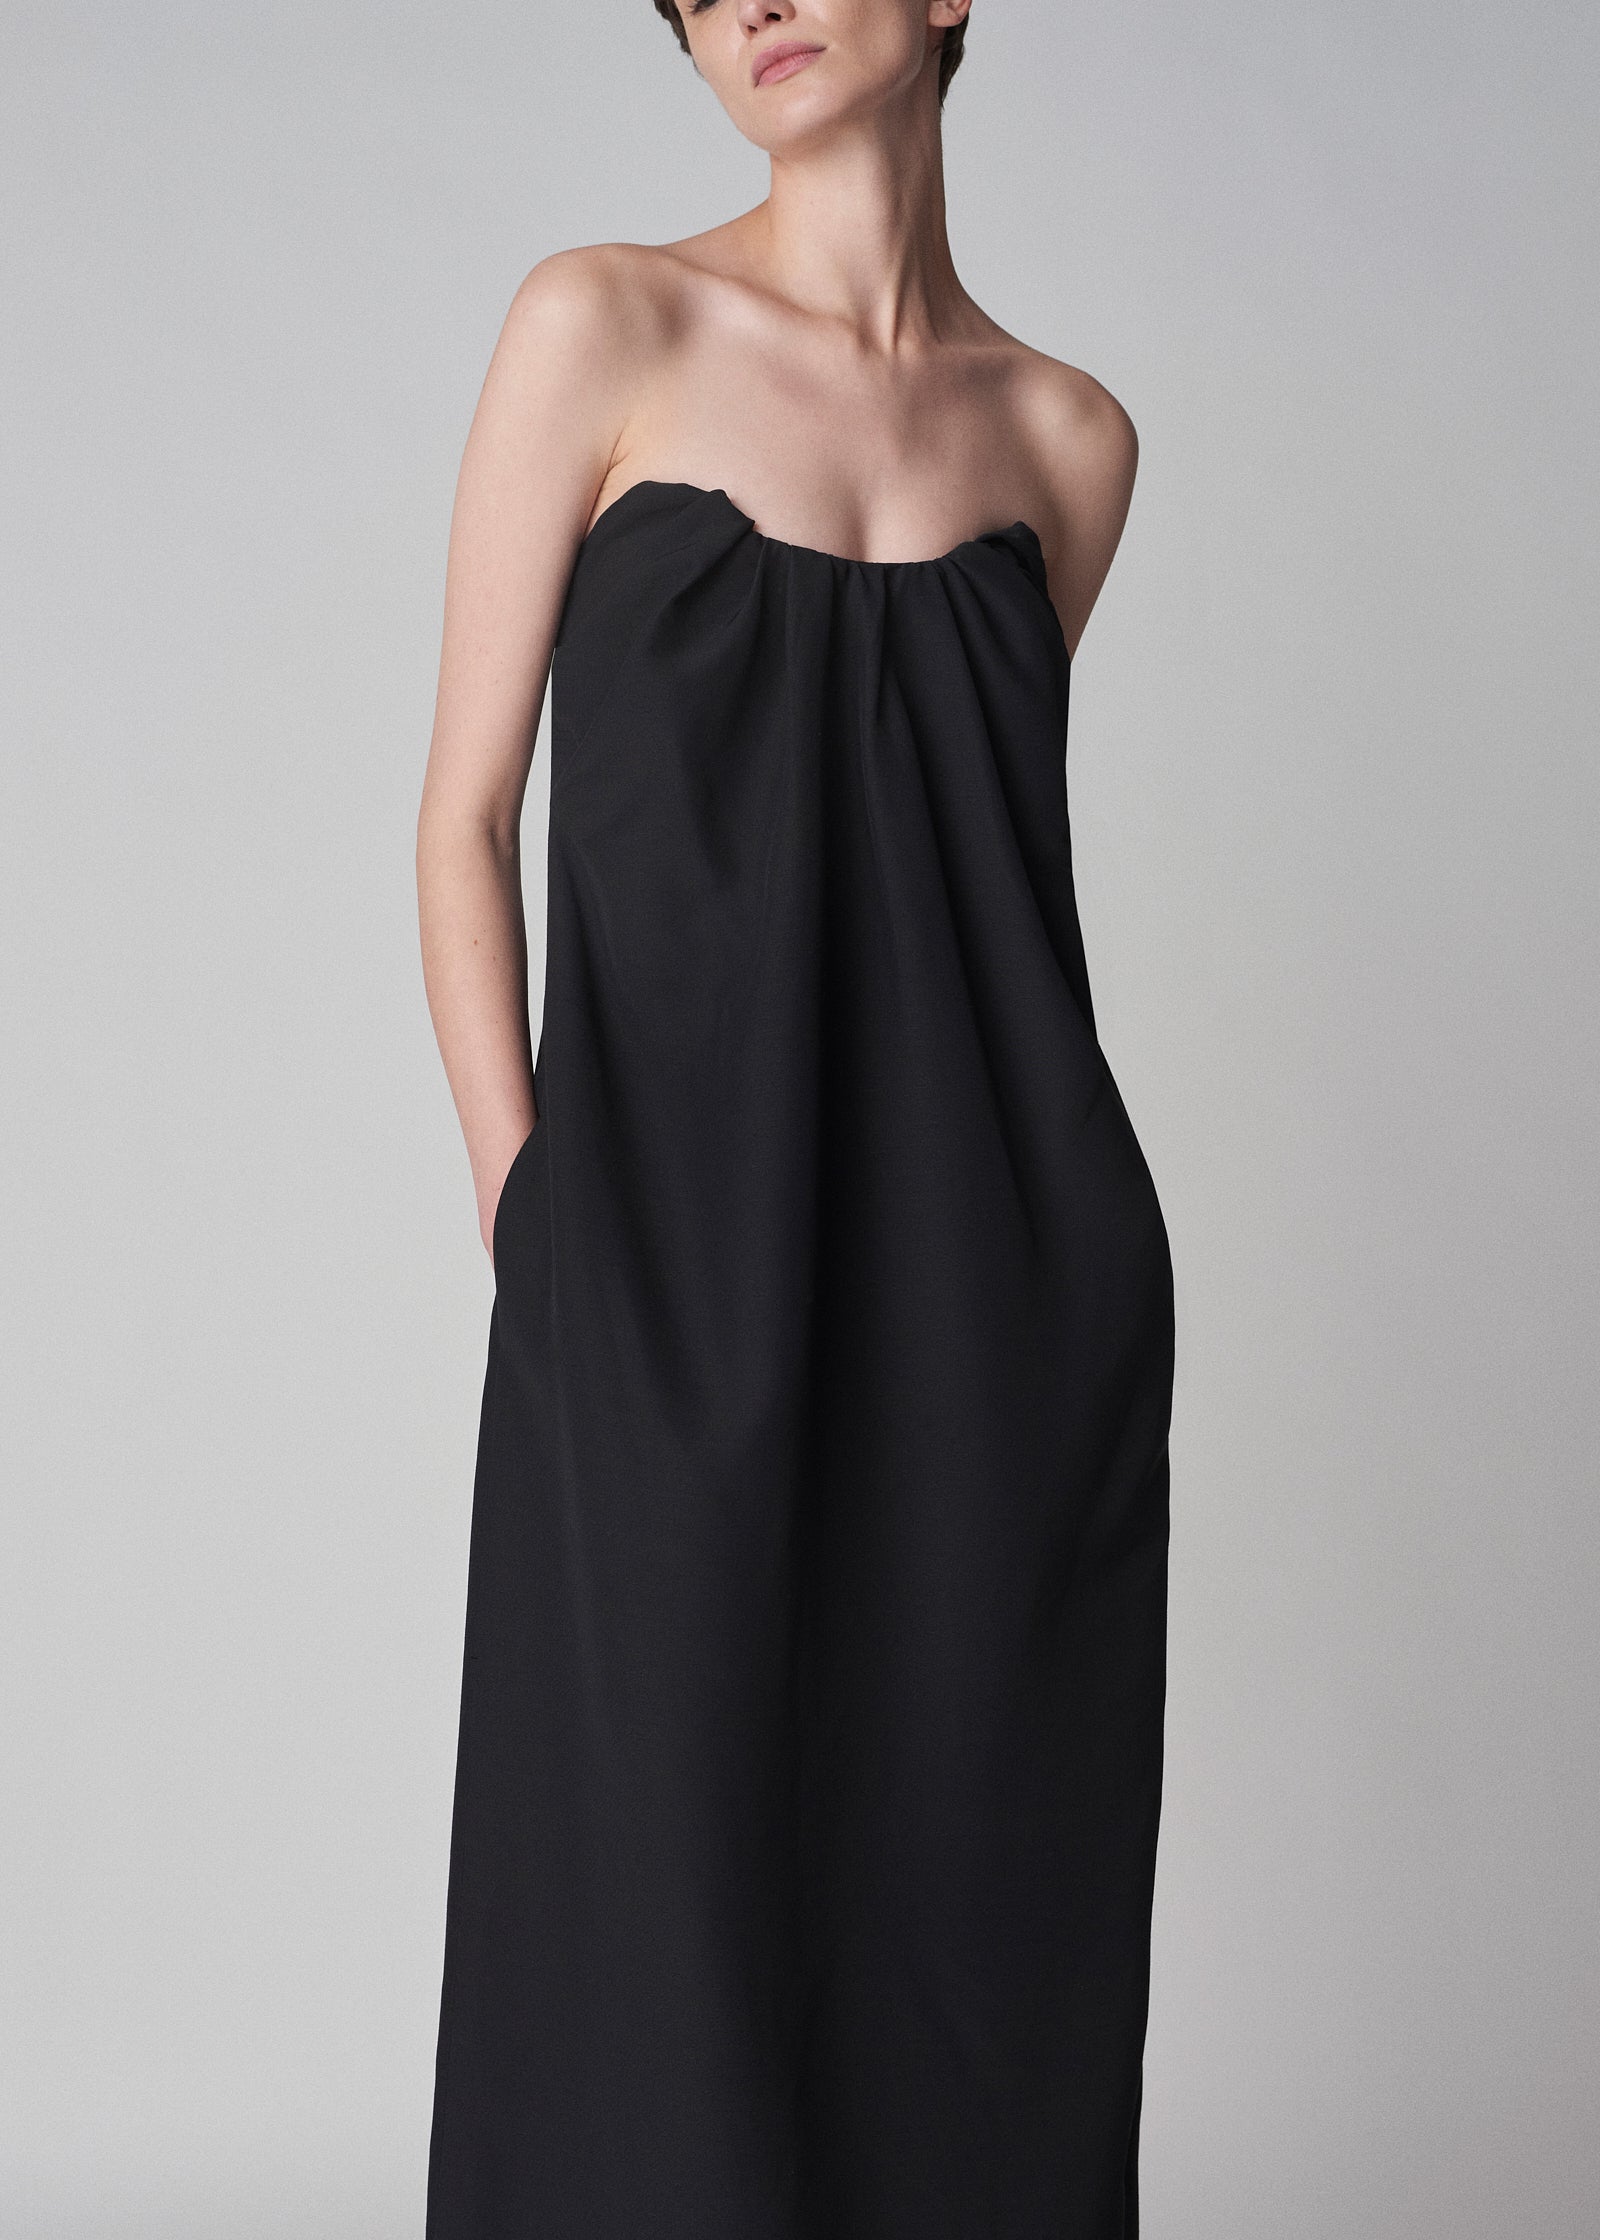 Bustier Dress in Smooth Faille - Black - CO Collections